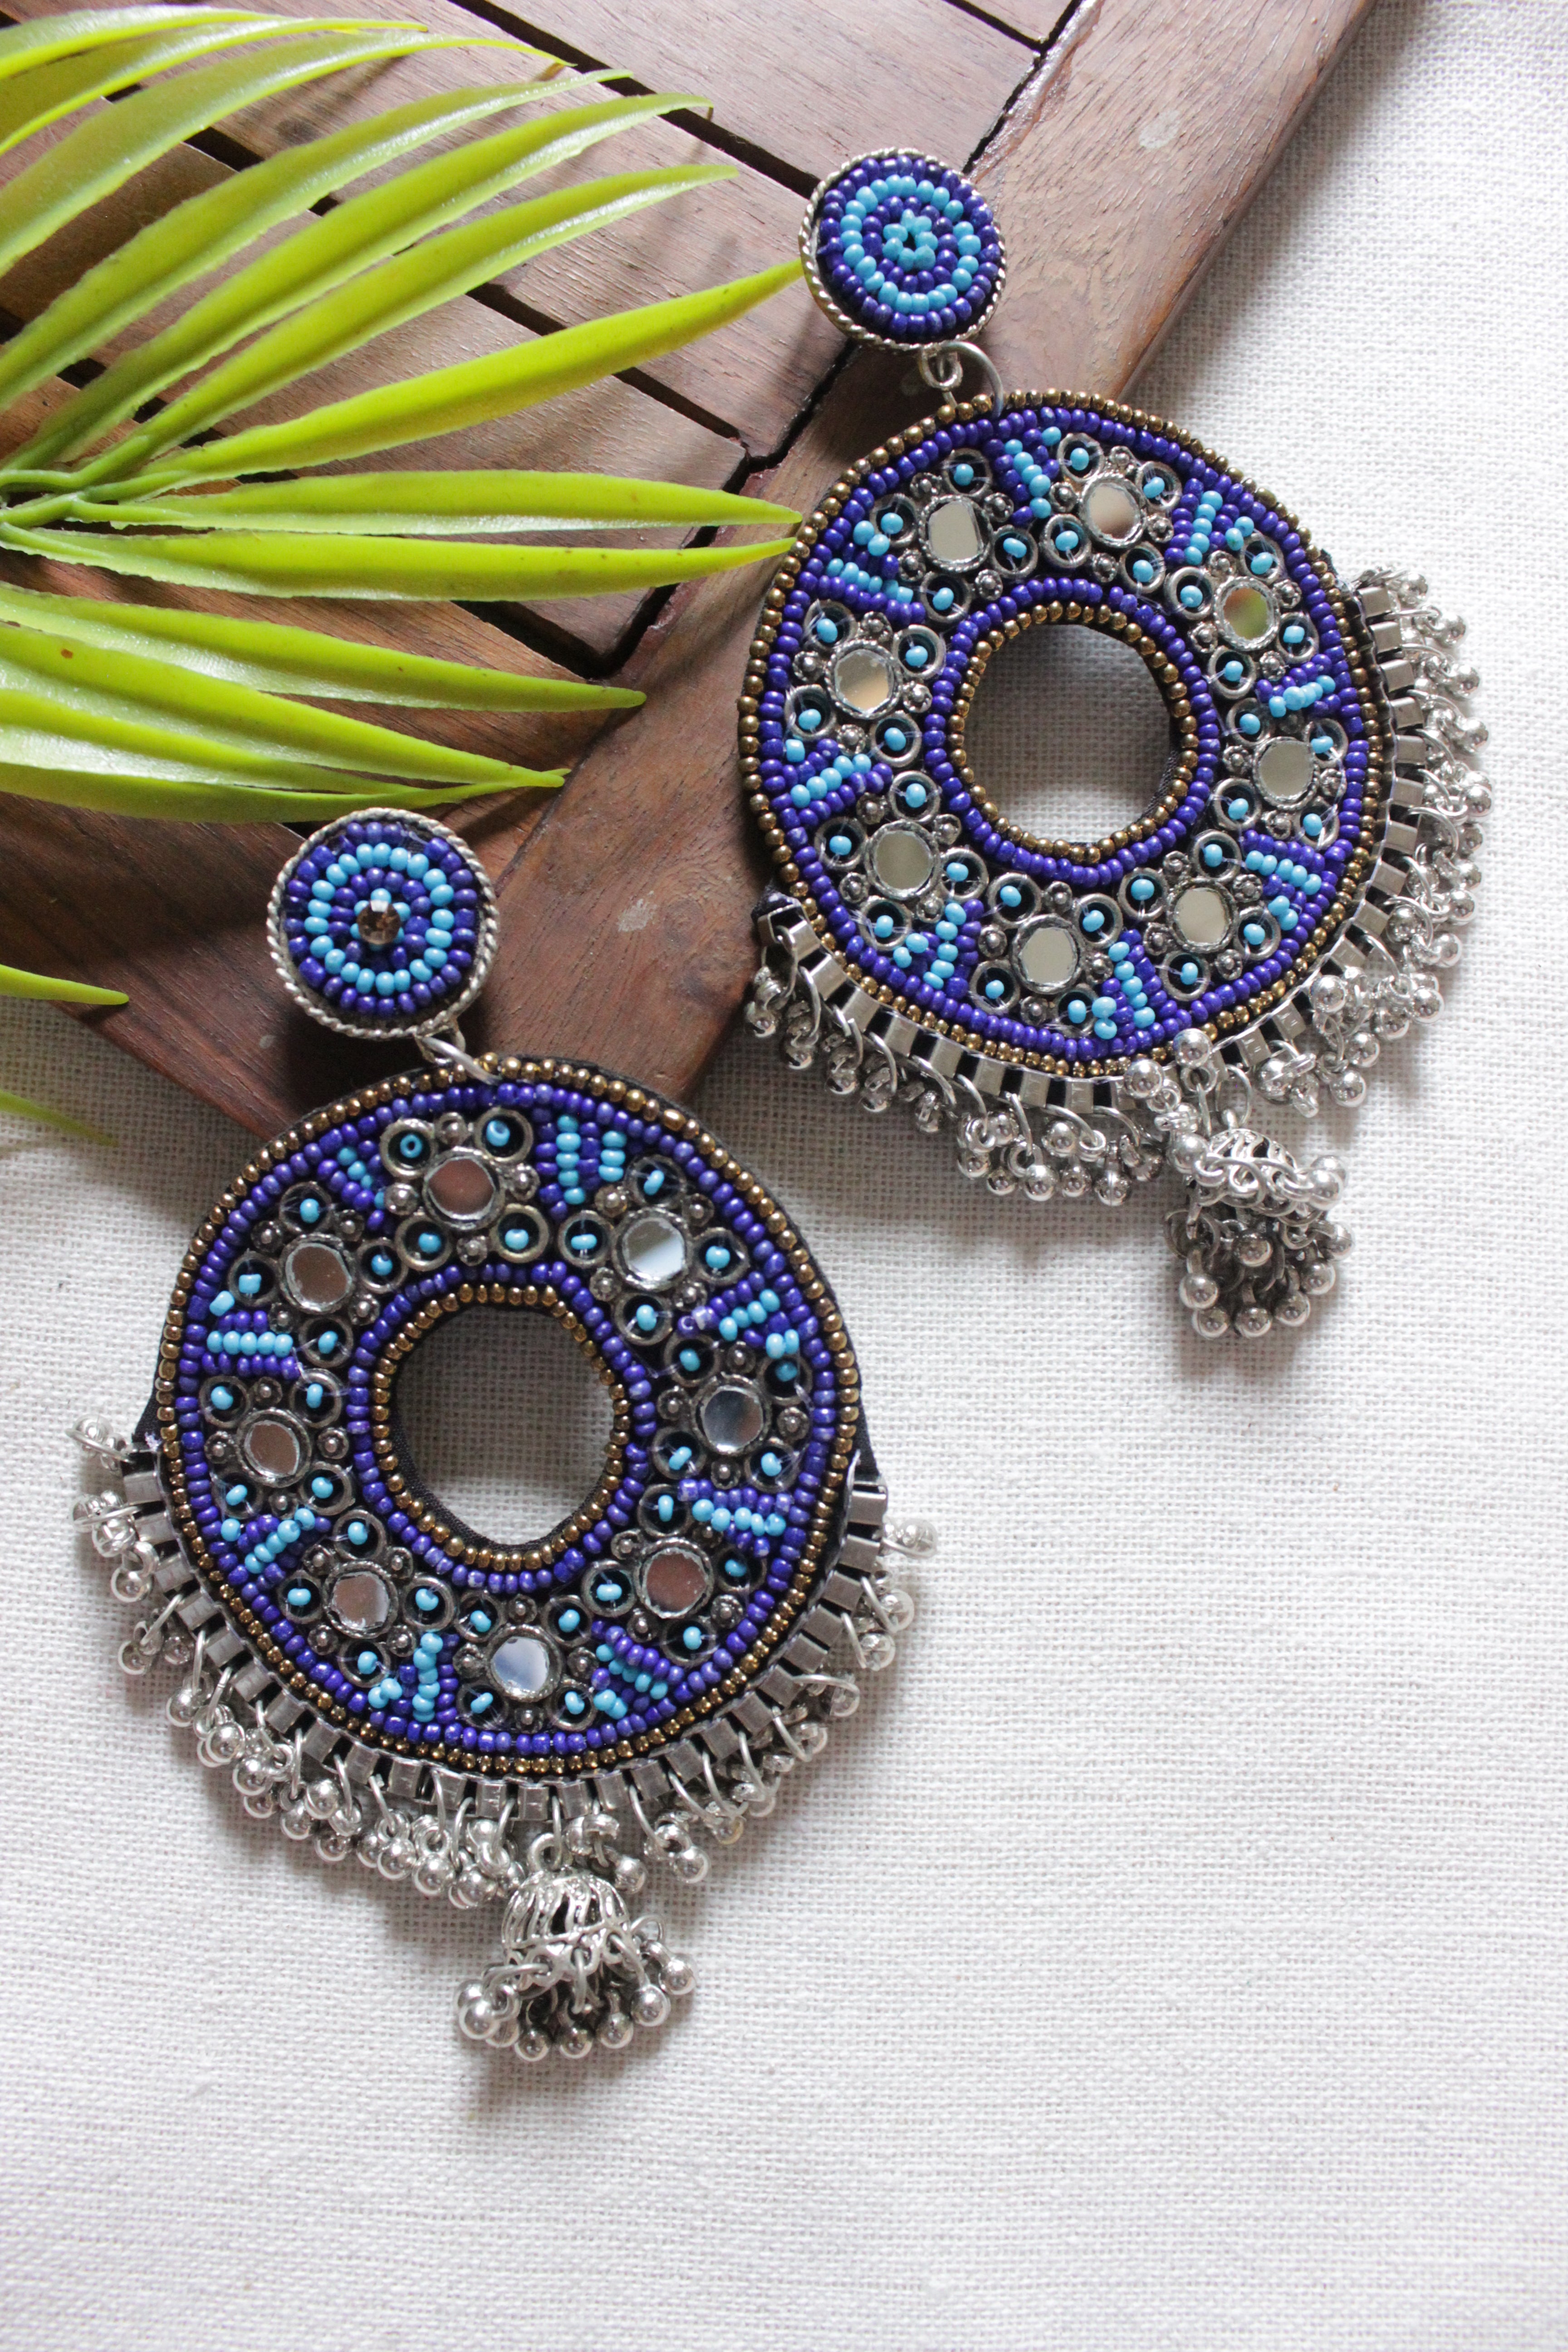 Shades of Blue Concentric Circles Beaded Metal Earrings